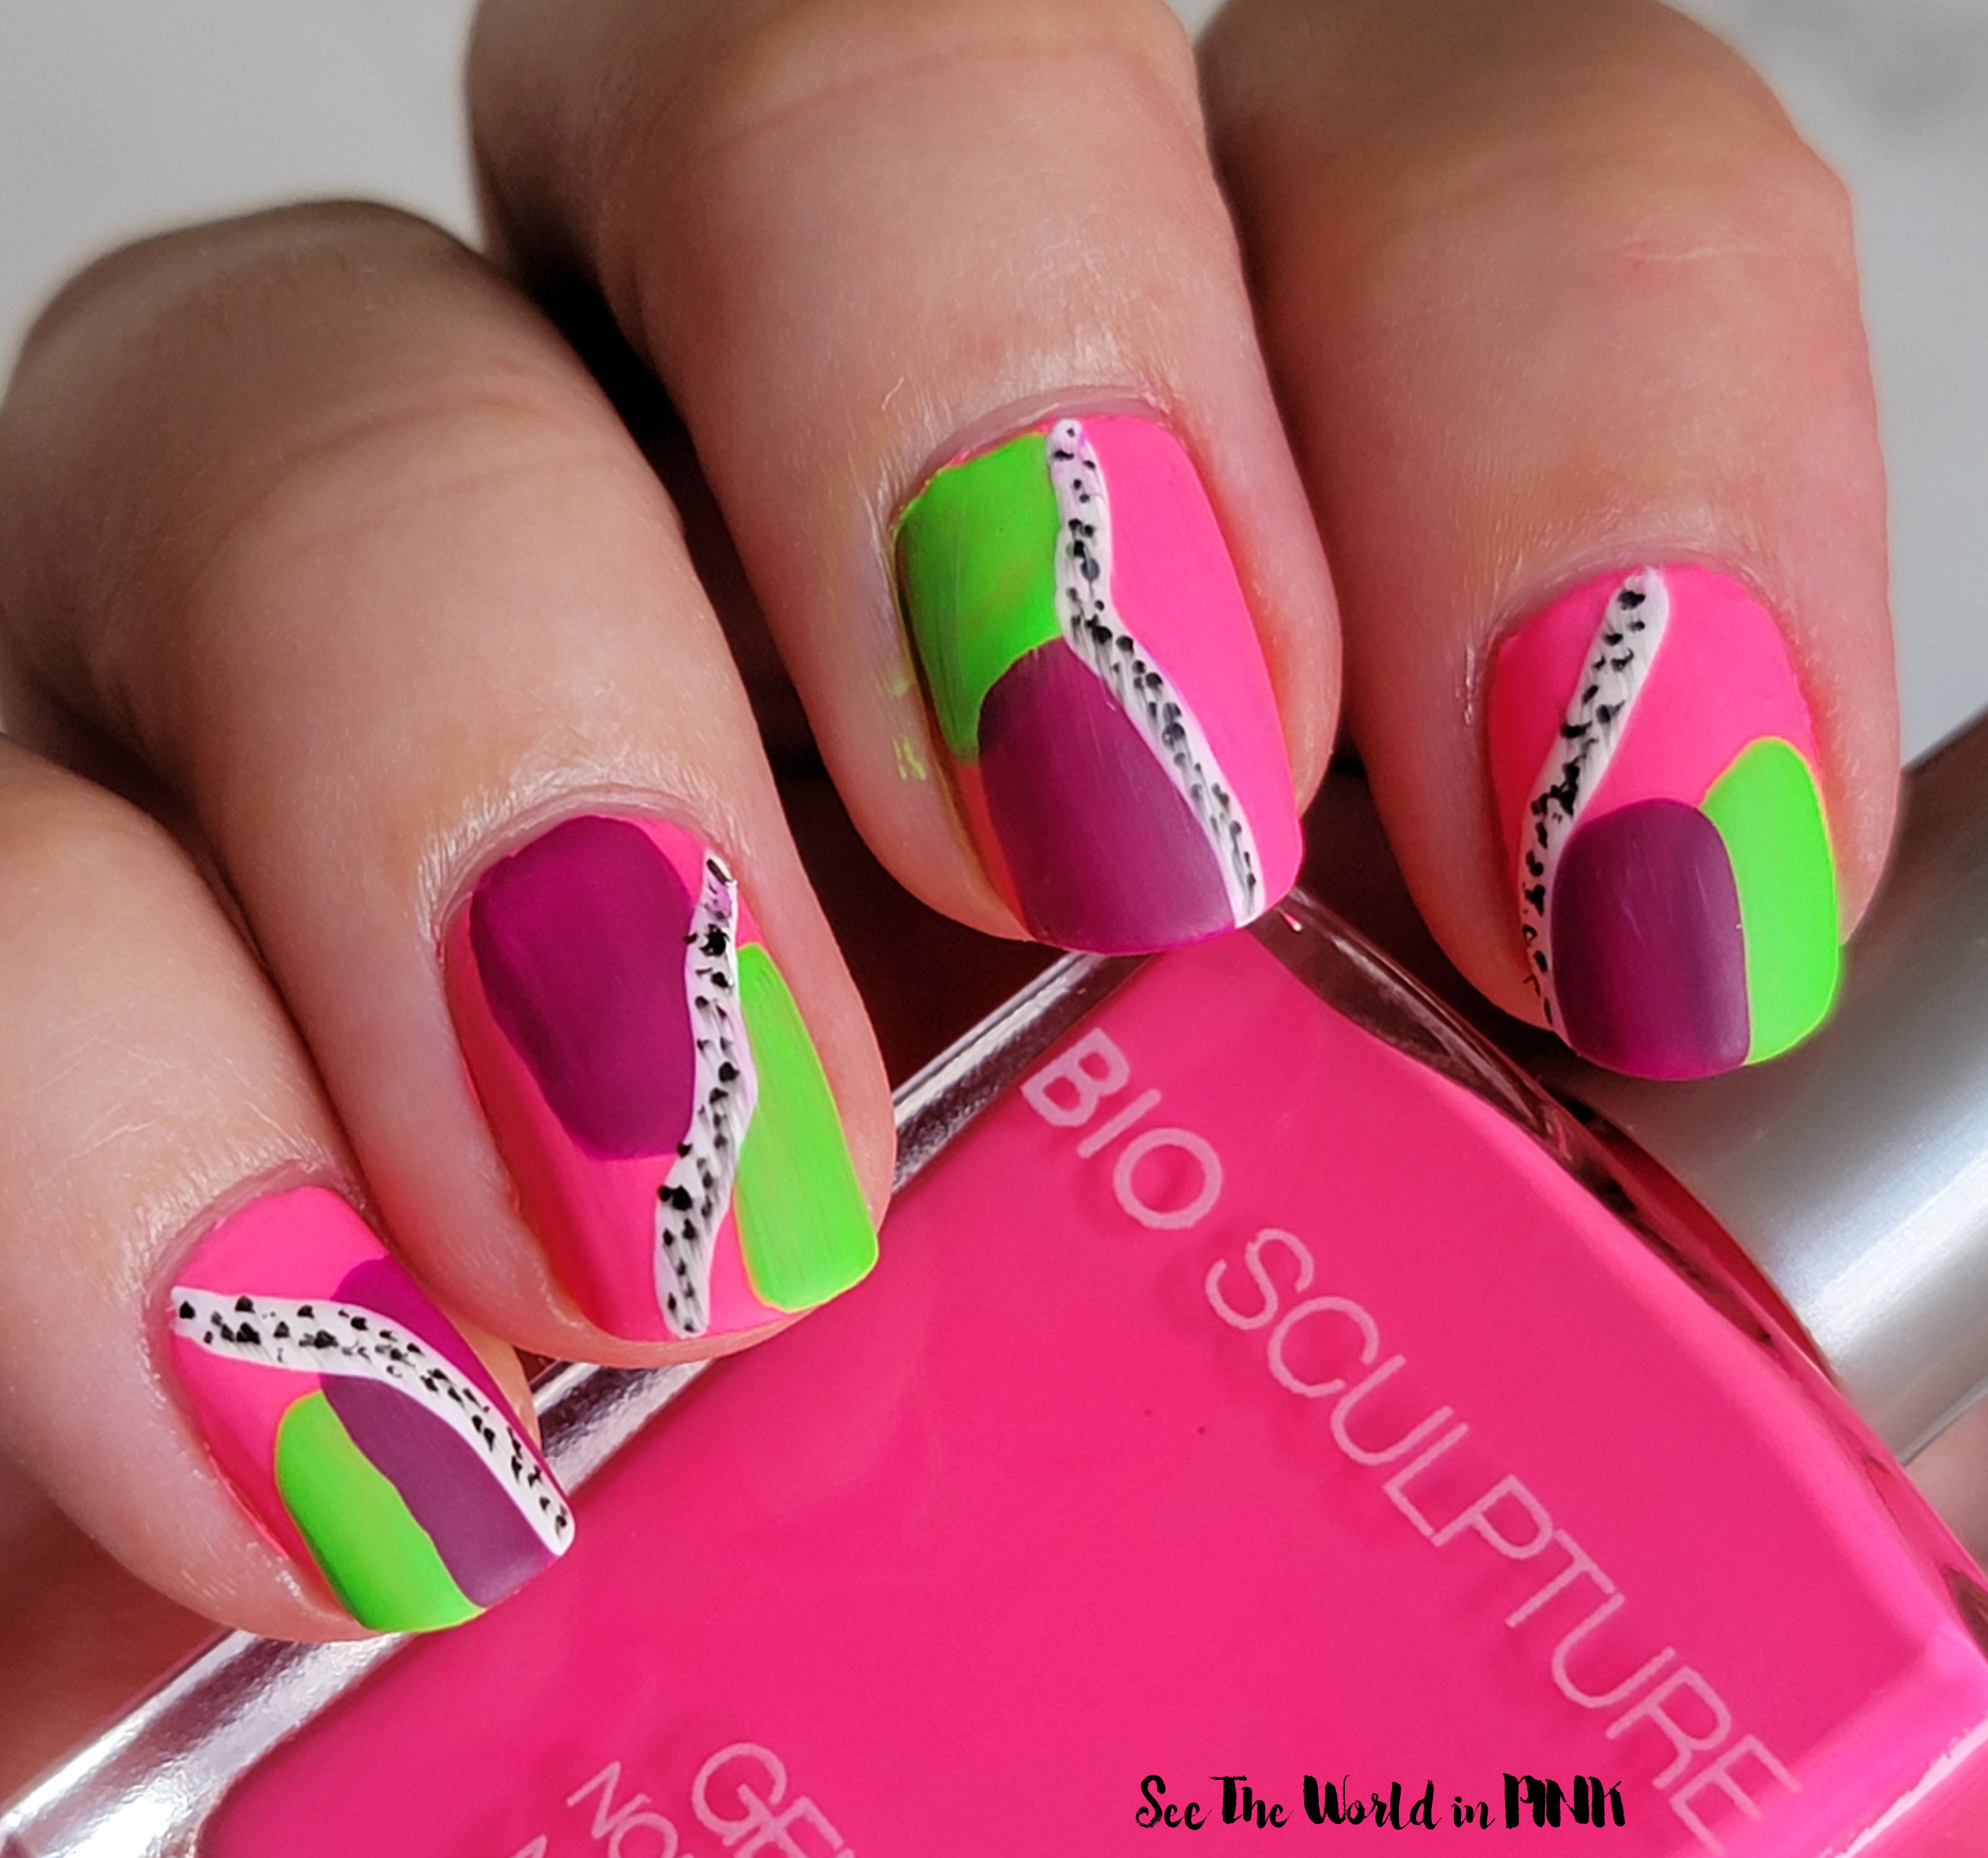 Manicure Monday - Neon Abstract Nails